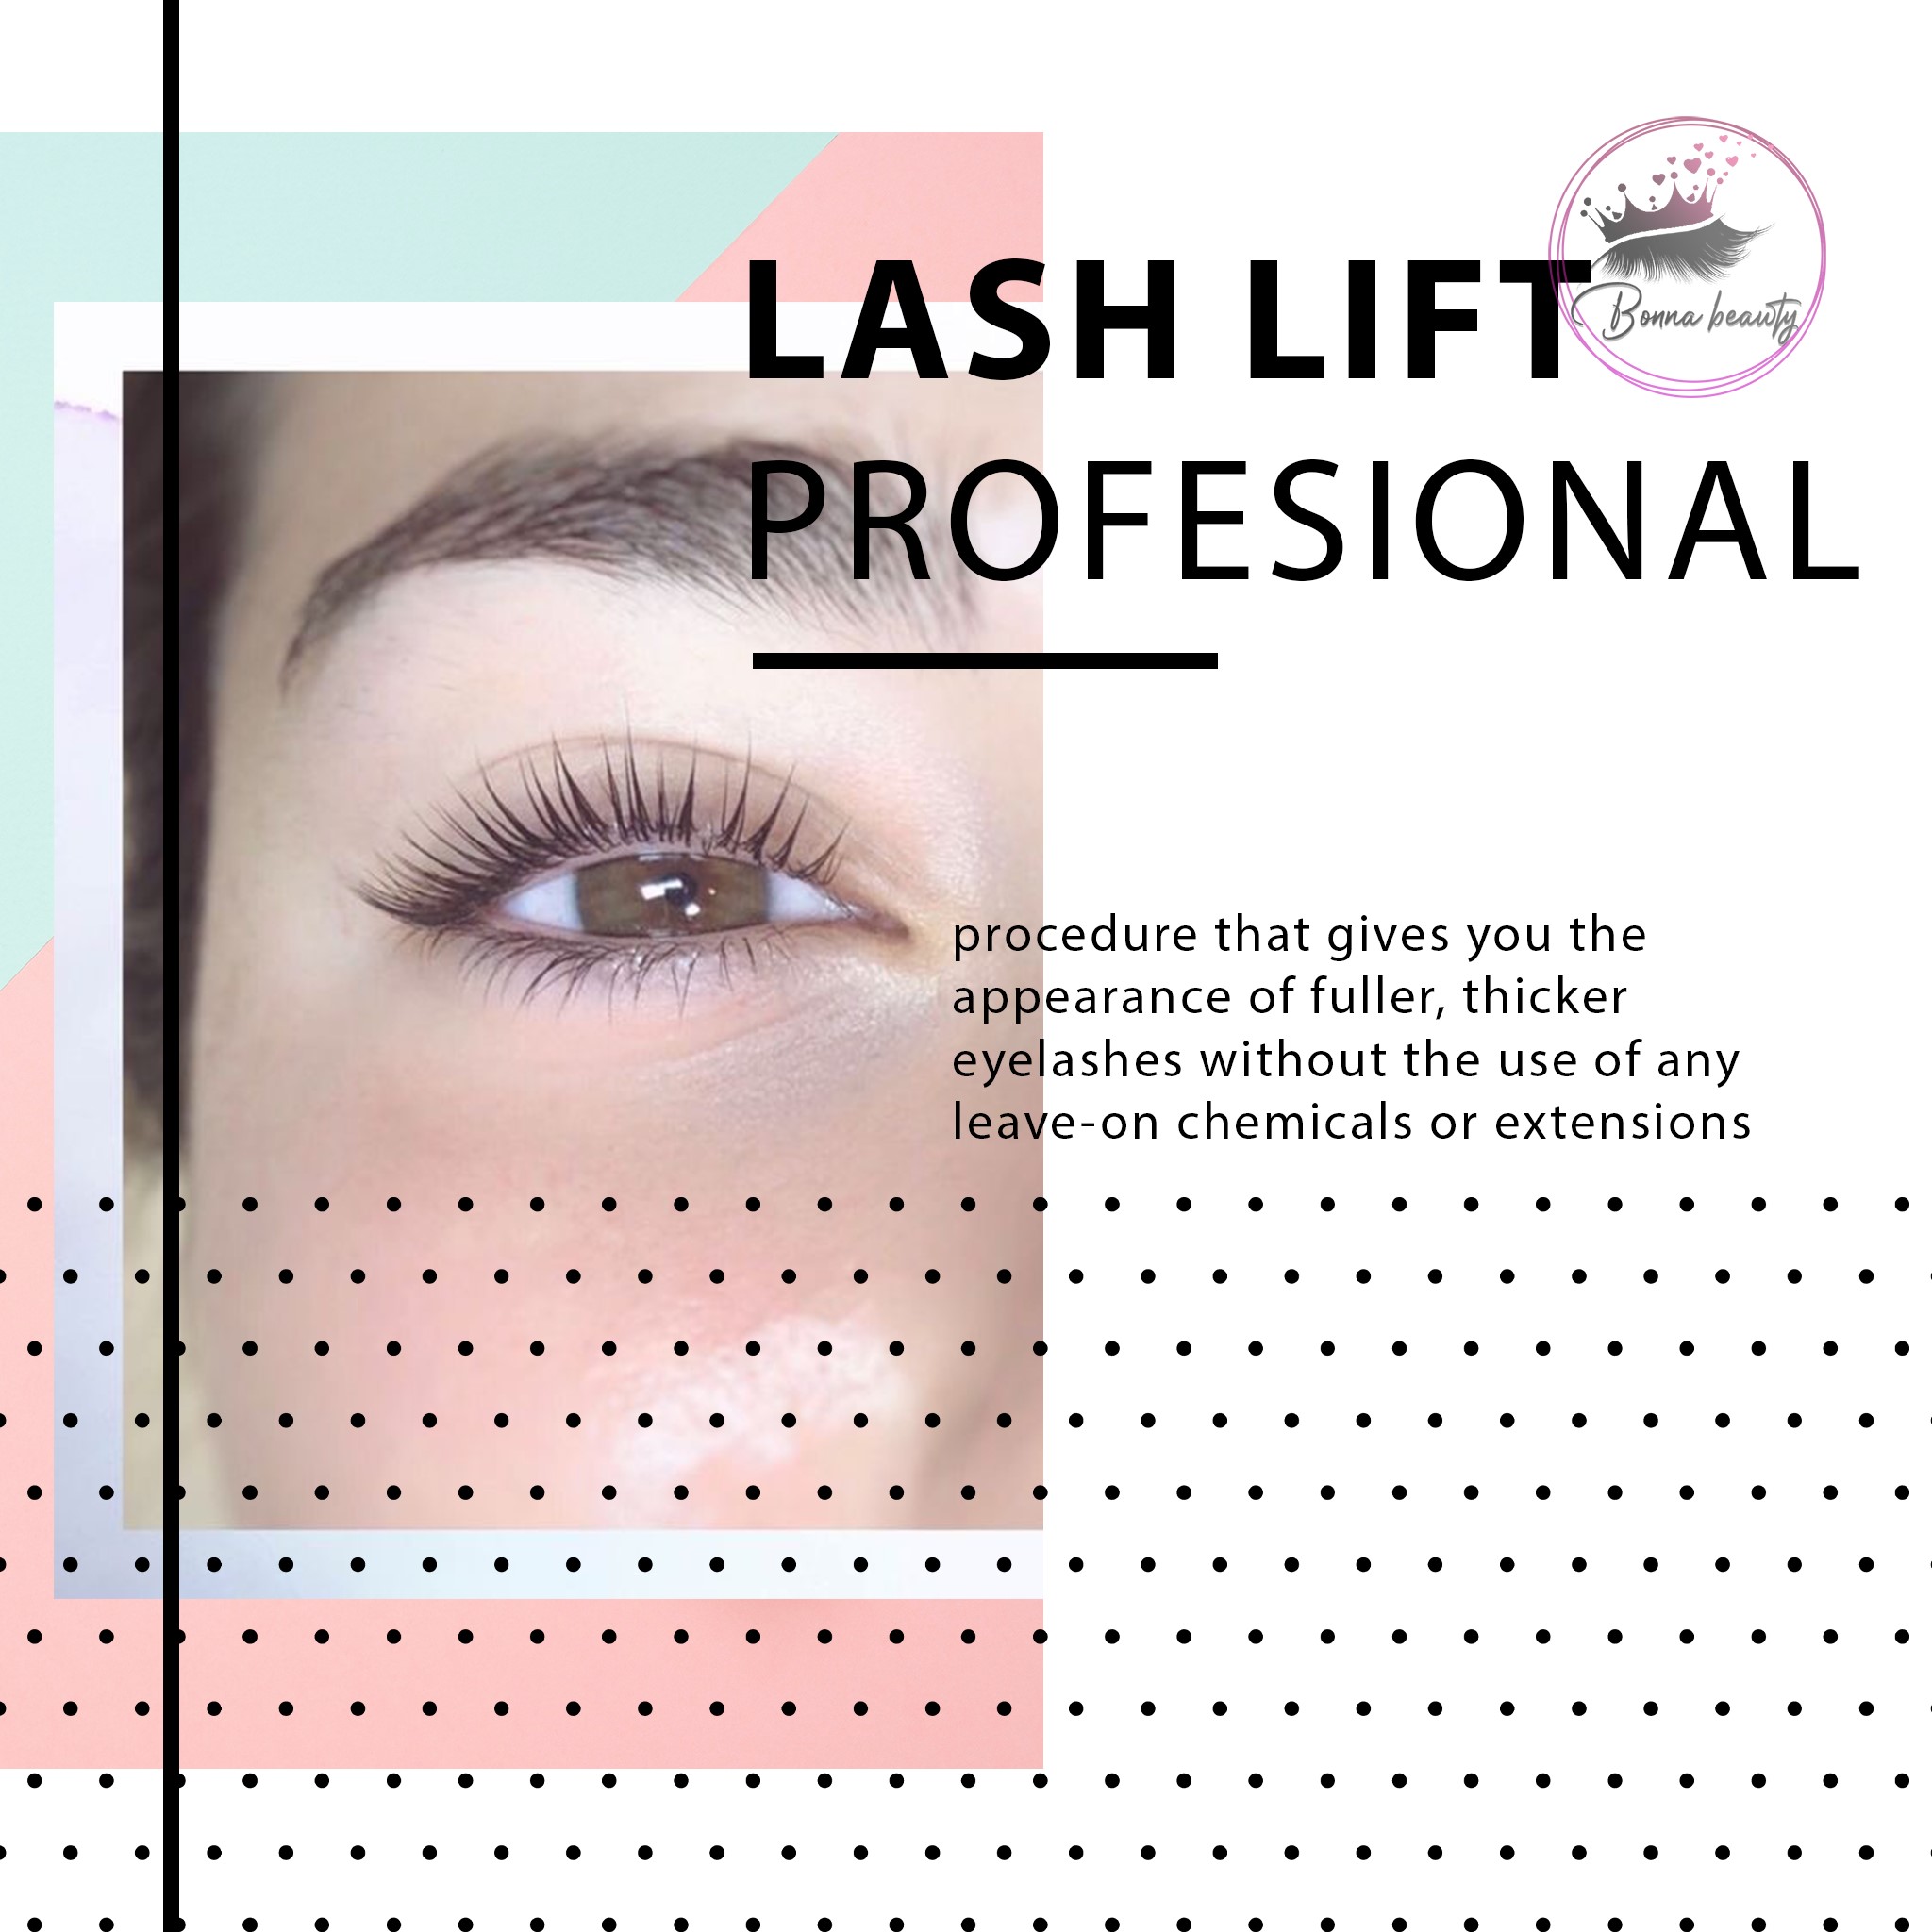 1 Academy Training | Eyelash extensions | Question Answer